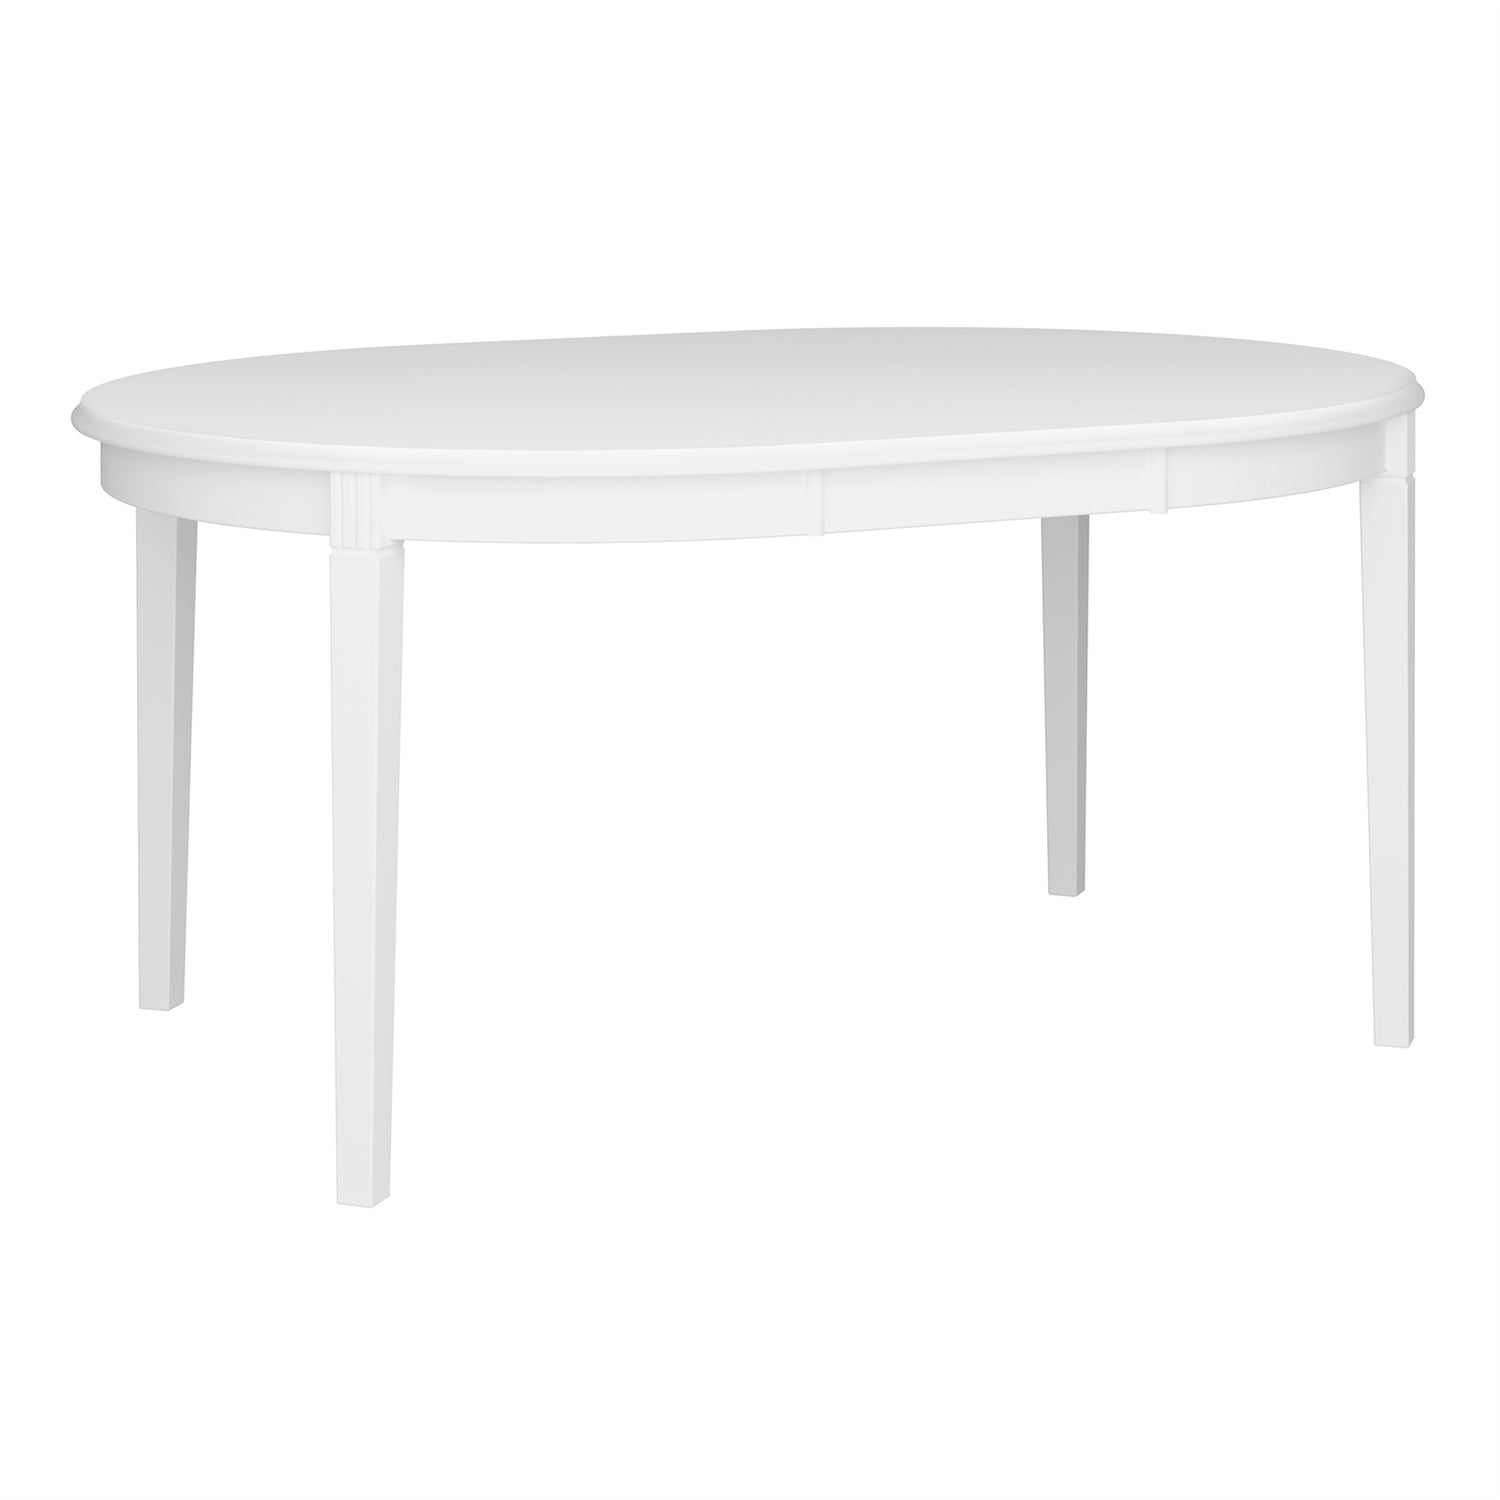 Steens Venice White Large Table